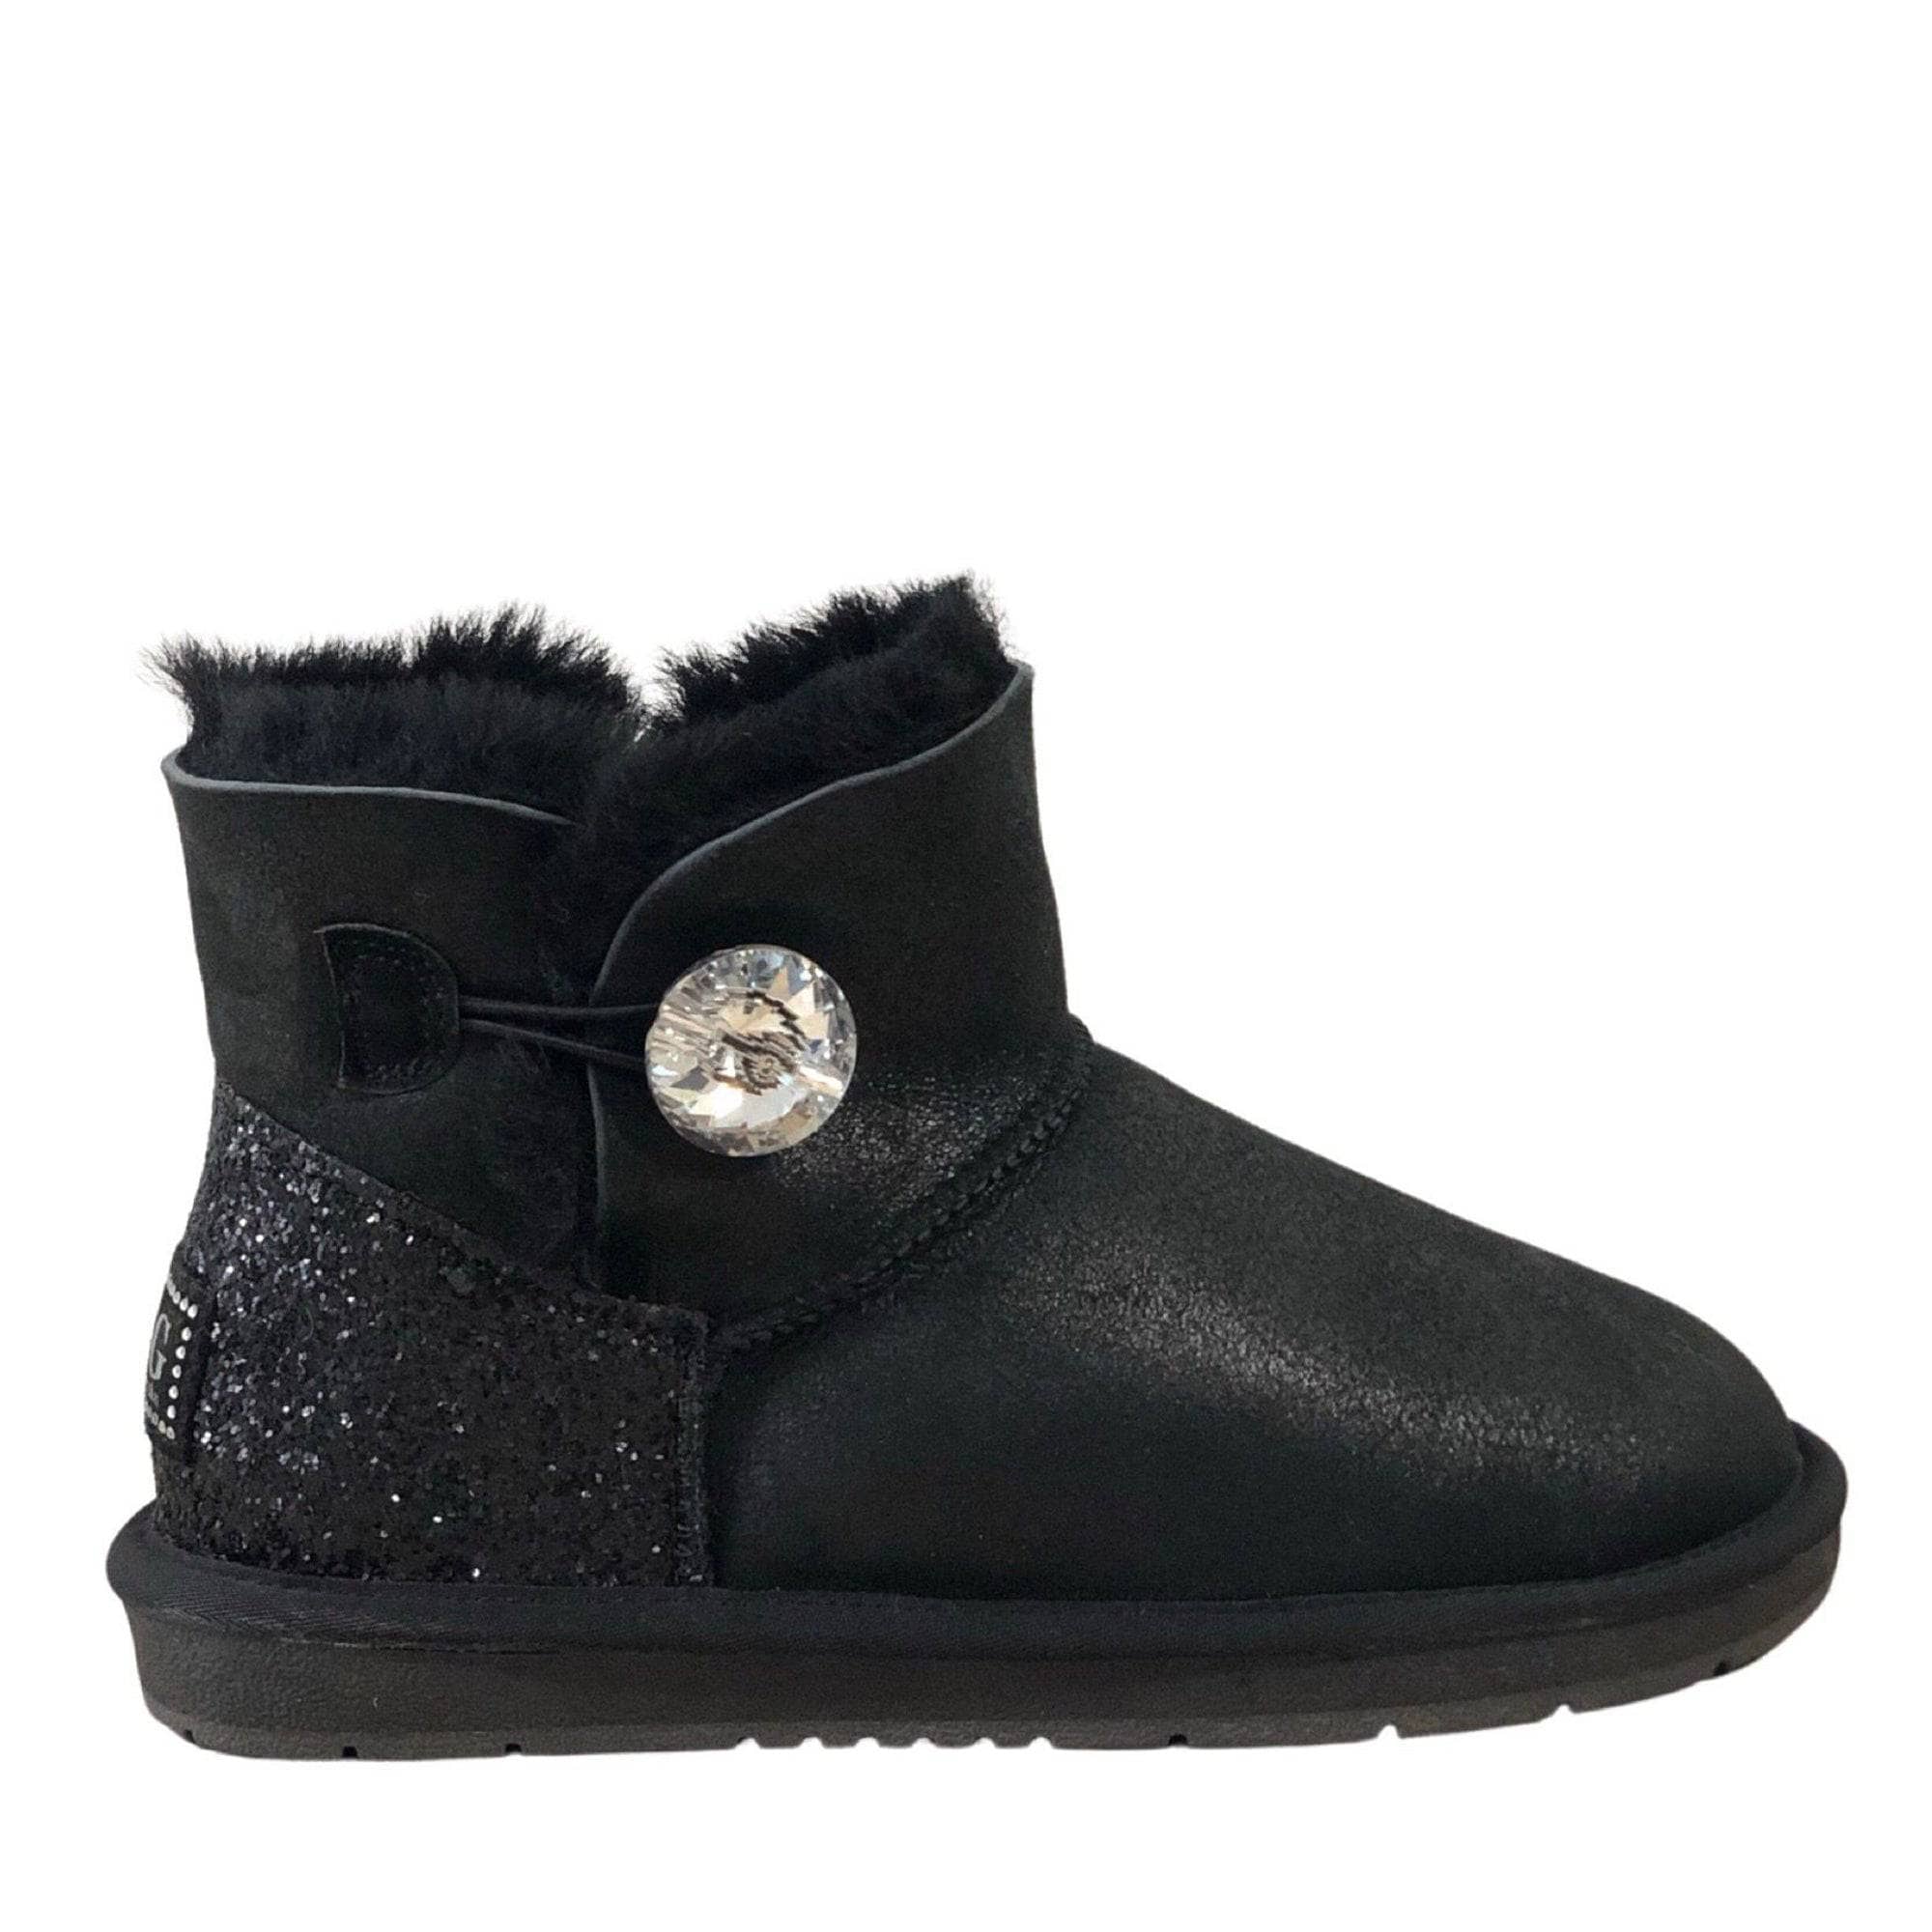 UGG, Shoes, 7 Ugg Classic Bling Mini Boots Size 6 New In Box